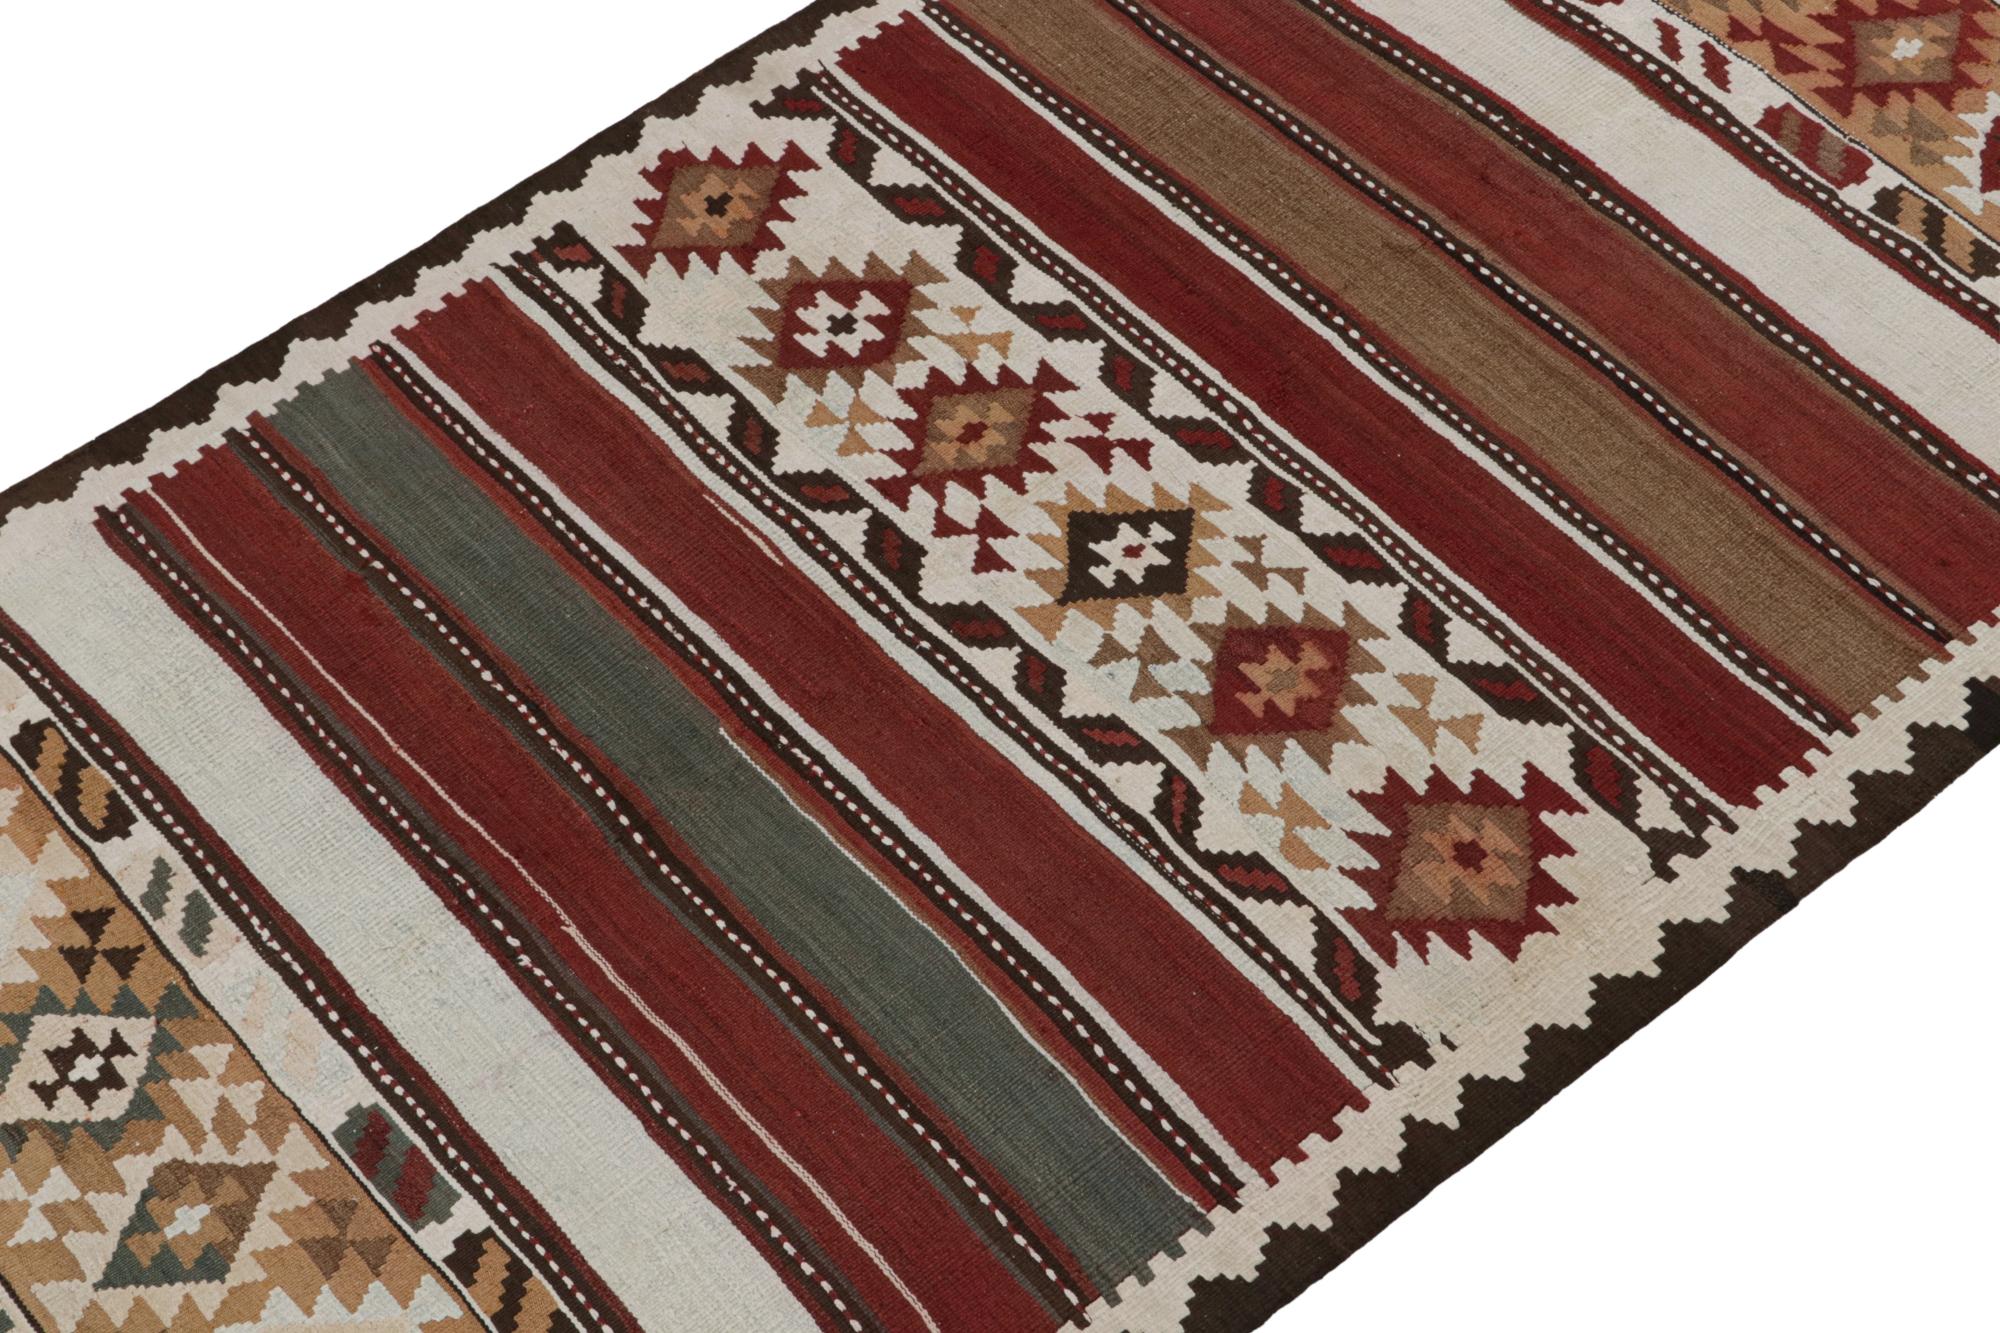 This vintage 5x12 Persian Kilim is believed to be a Shahsavan tribal rug—handwoven in wool circa 1950-1960.

On the Design: 

This runner enjoys stripes and geometric patterns in rust, burgundy red, beige-brown, teal and white tones in its wide